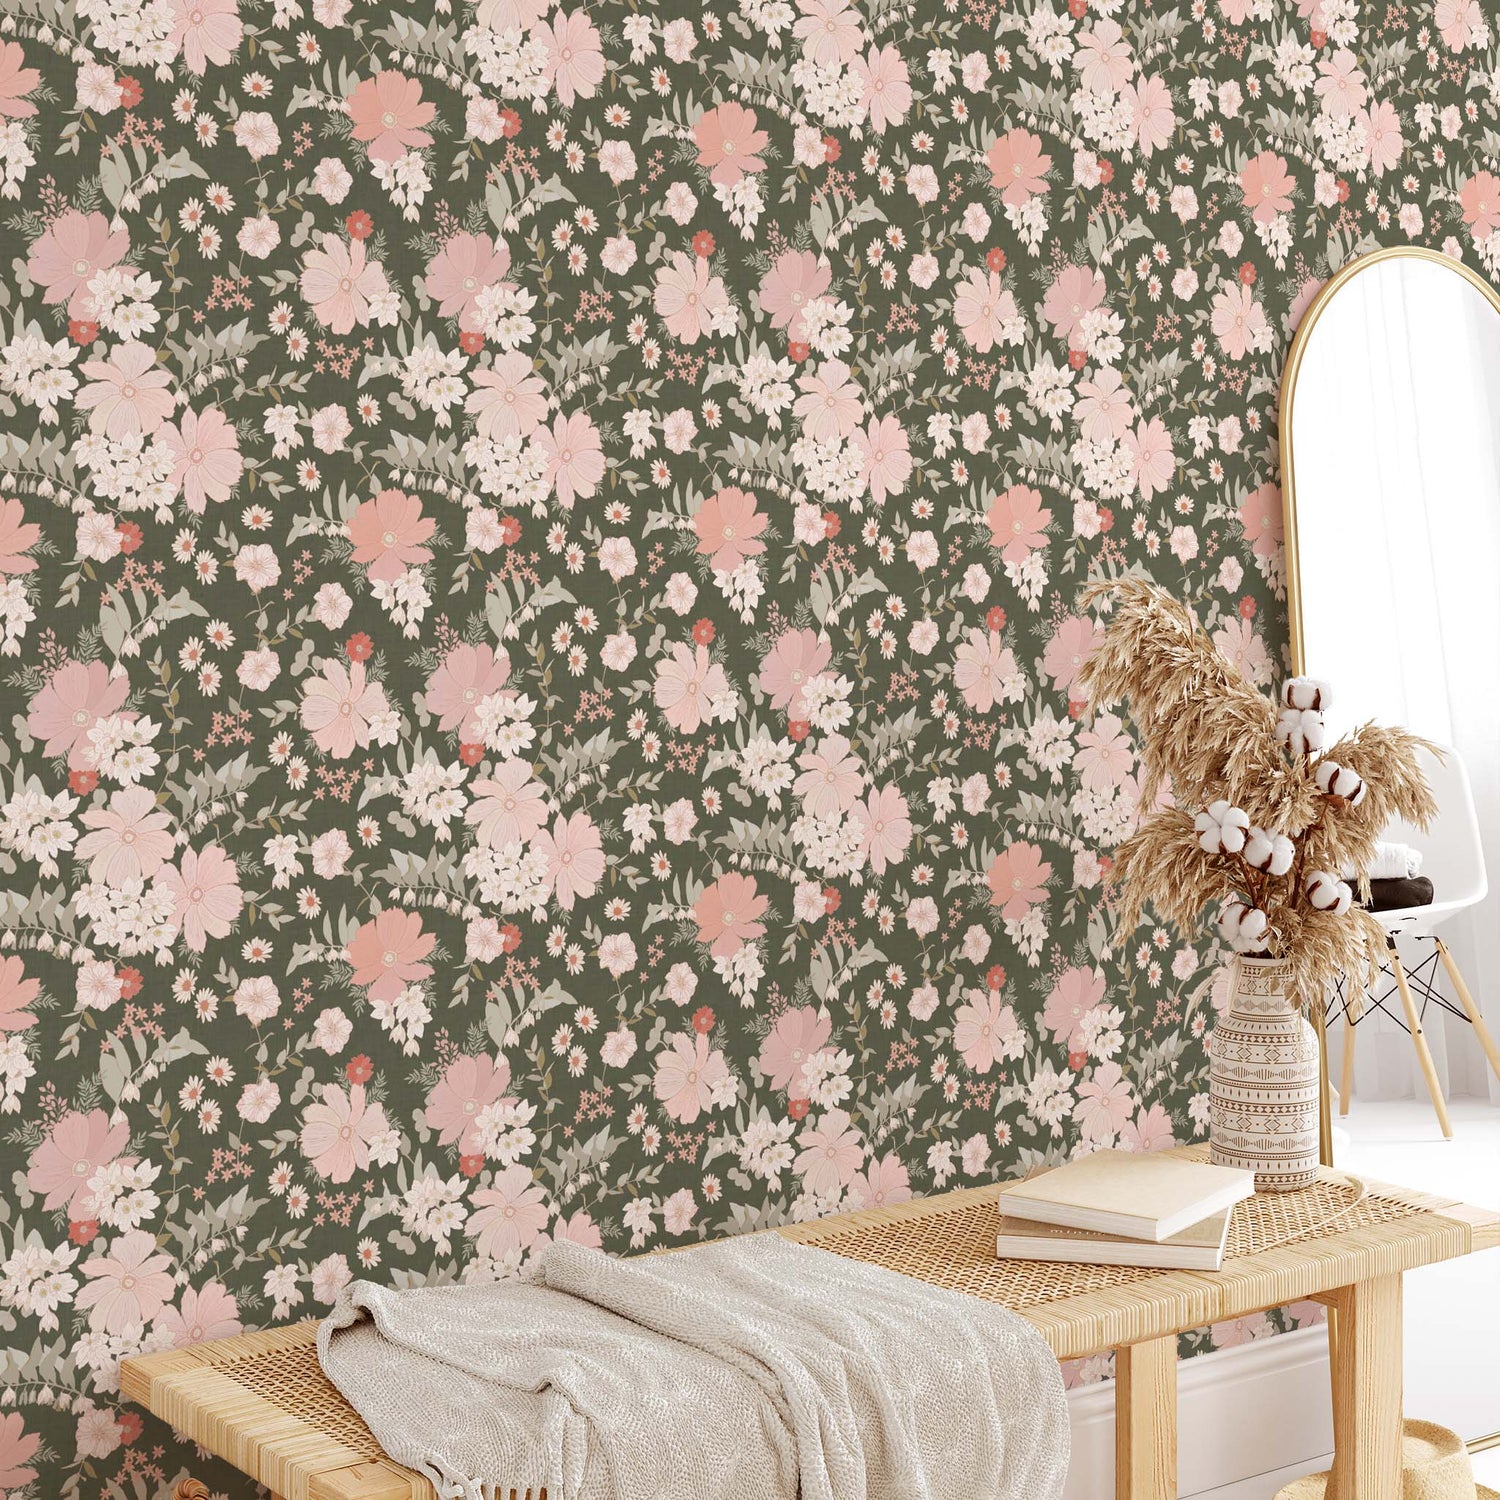 Make your walls bloom with delight! Our Spring Florals Wallpaper is a statement-making solution, featuring elegant flowers to add a touch of springtime beauty to your home. 